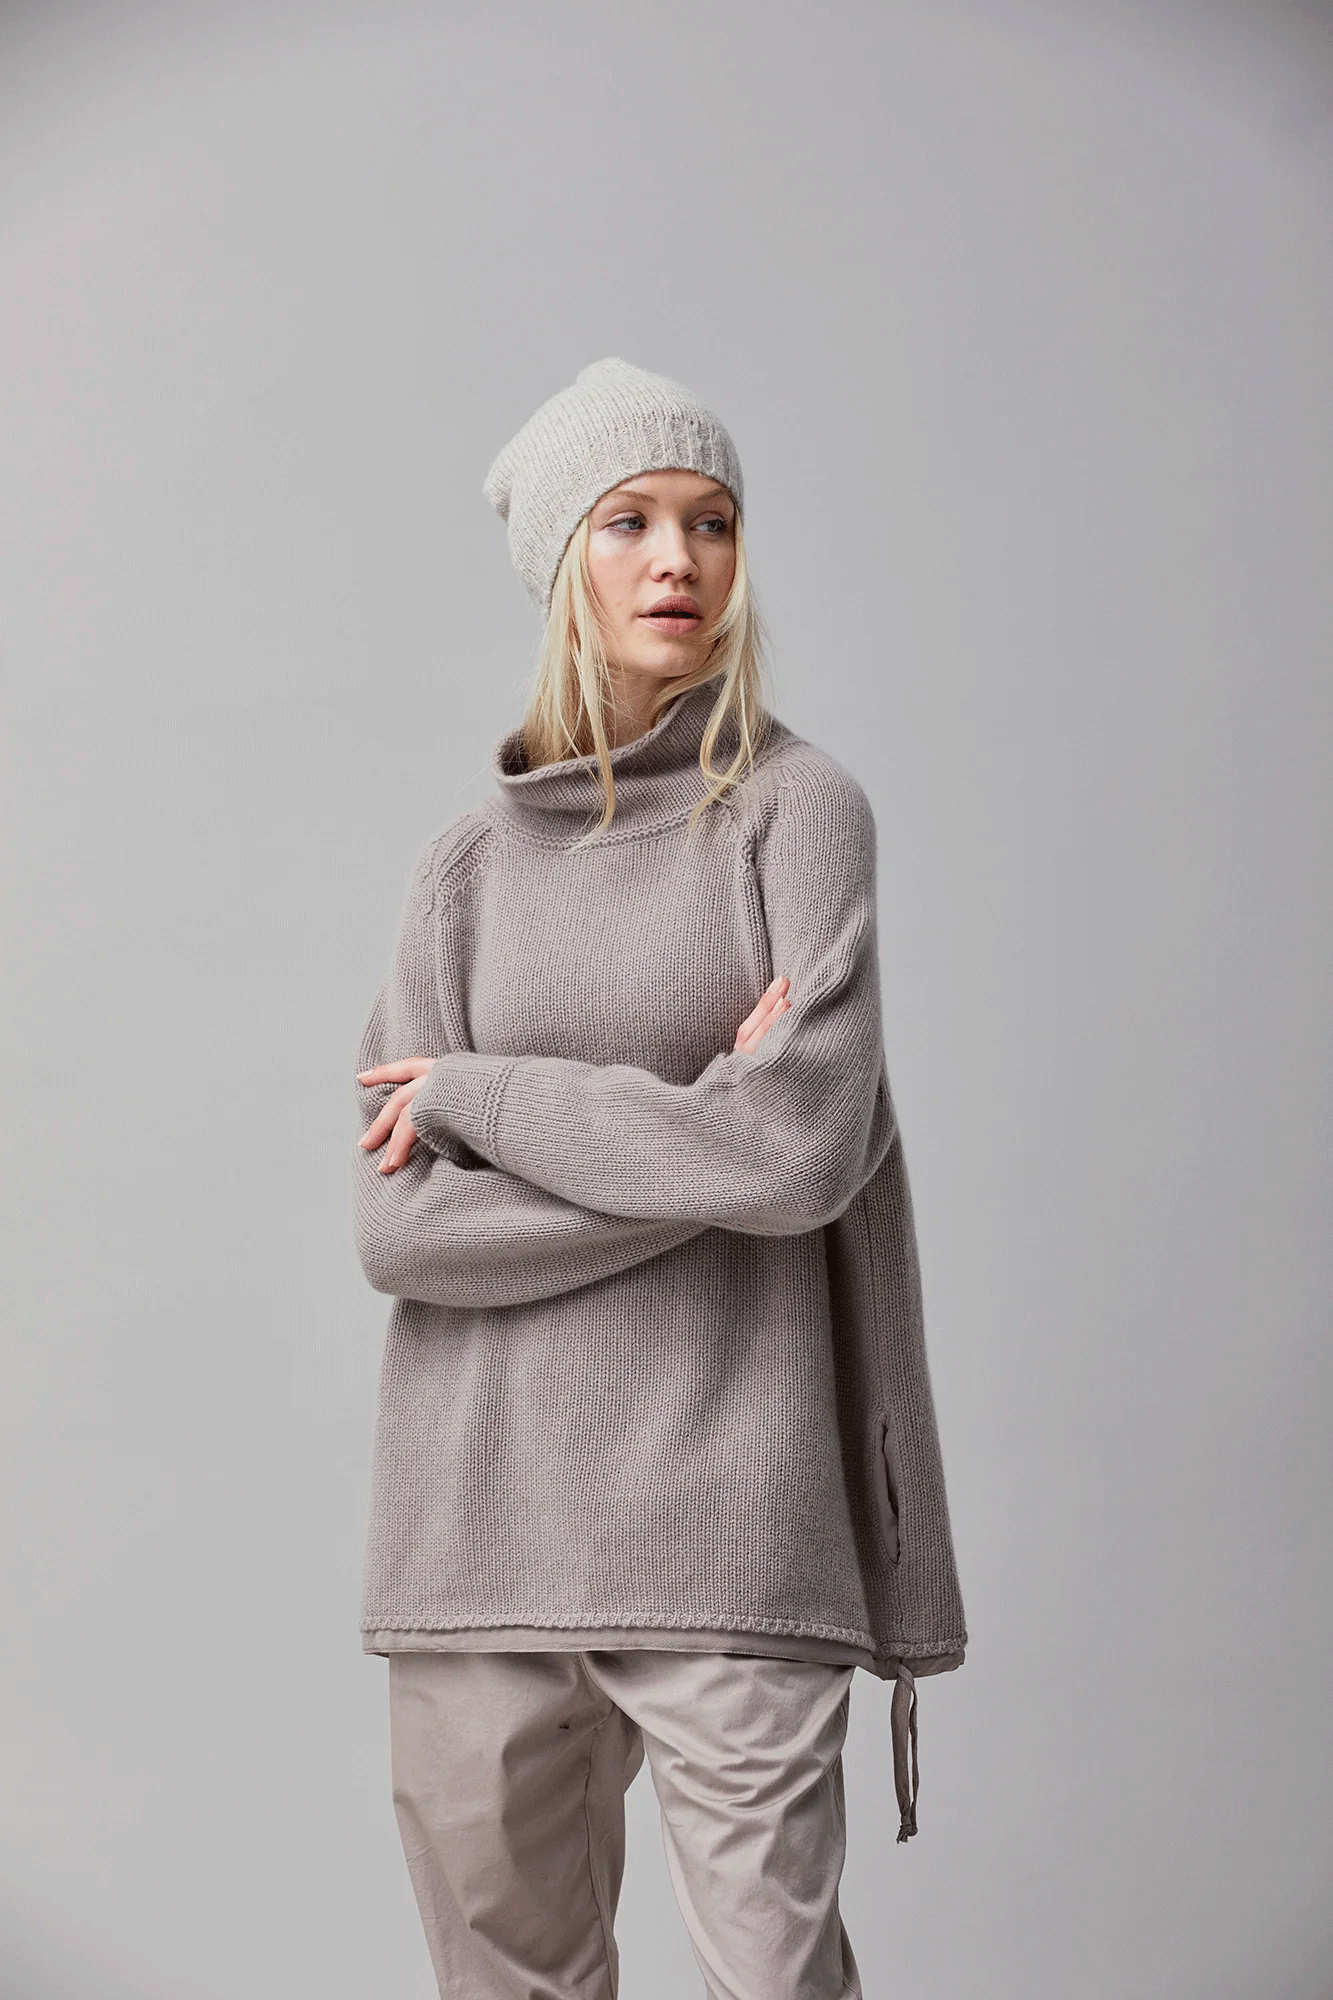 The Cashmere Crewneck from Kristensen Du Nord is a luxuriously soft sweater crafted from 100% Cashmere. Feel the sheer comfort and enjoy the stylish look of this versatile piece. Enjoy the finest quality and unbeatable softness.